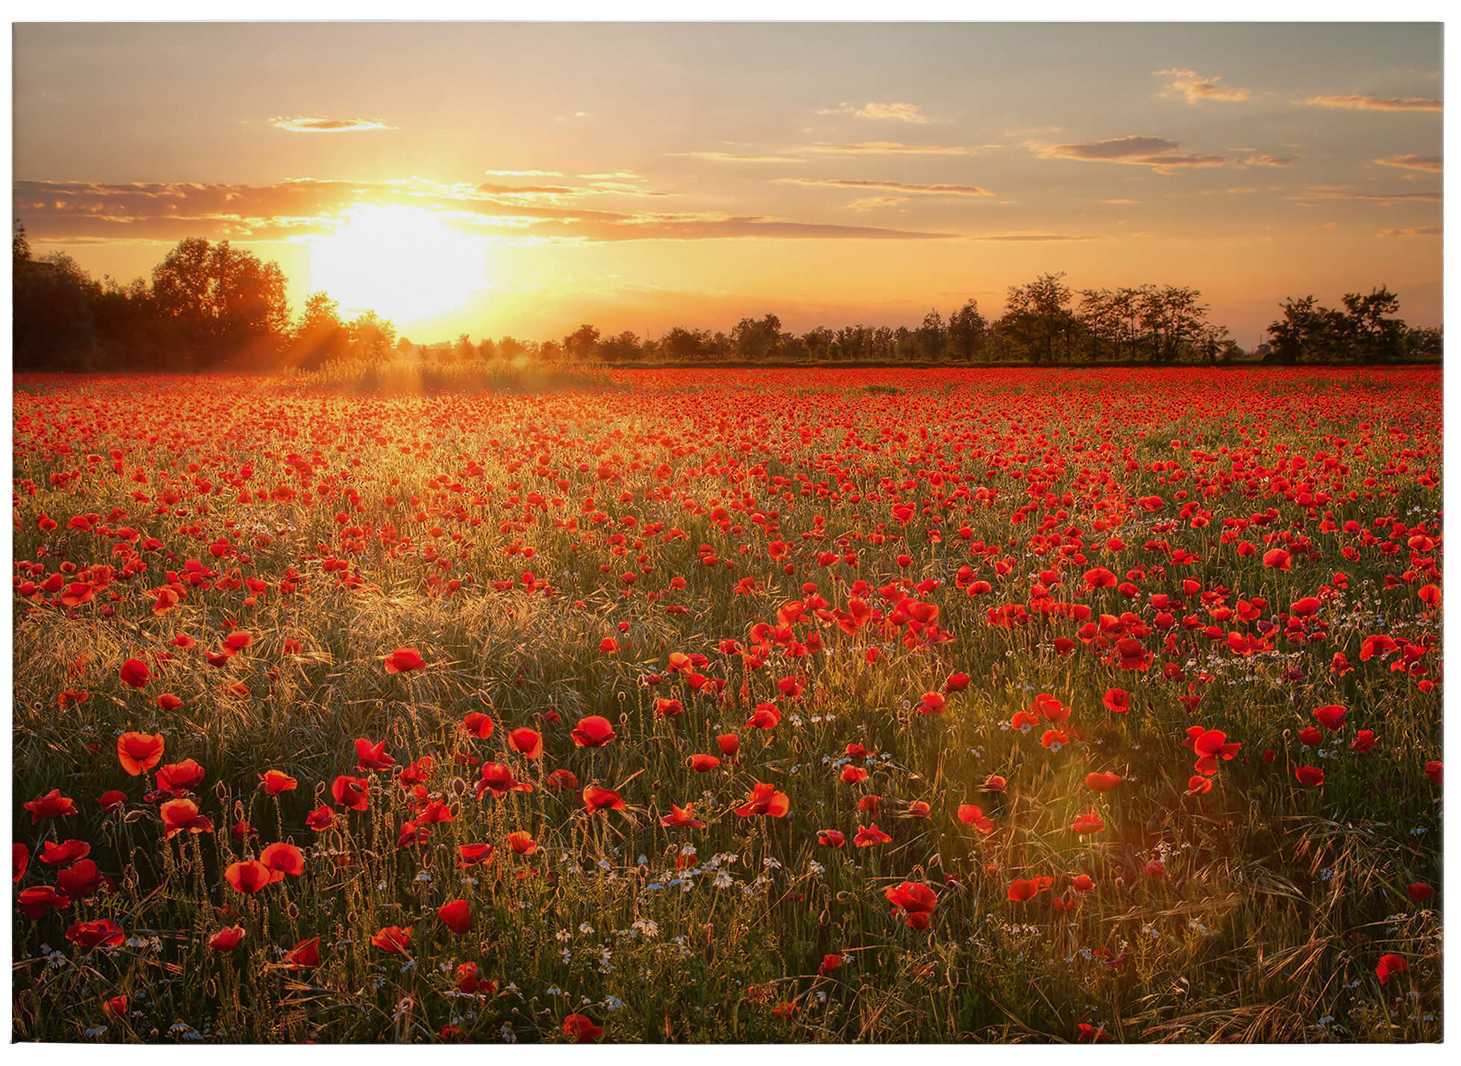             Canvas print with poppy field in the sunset
        